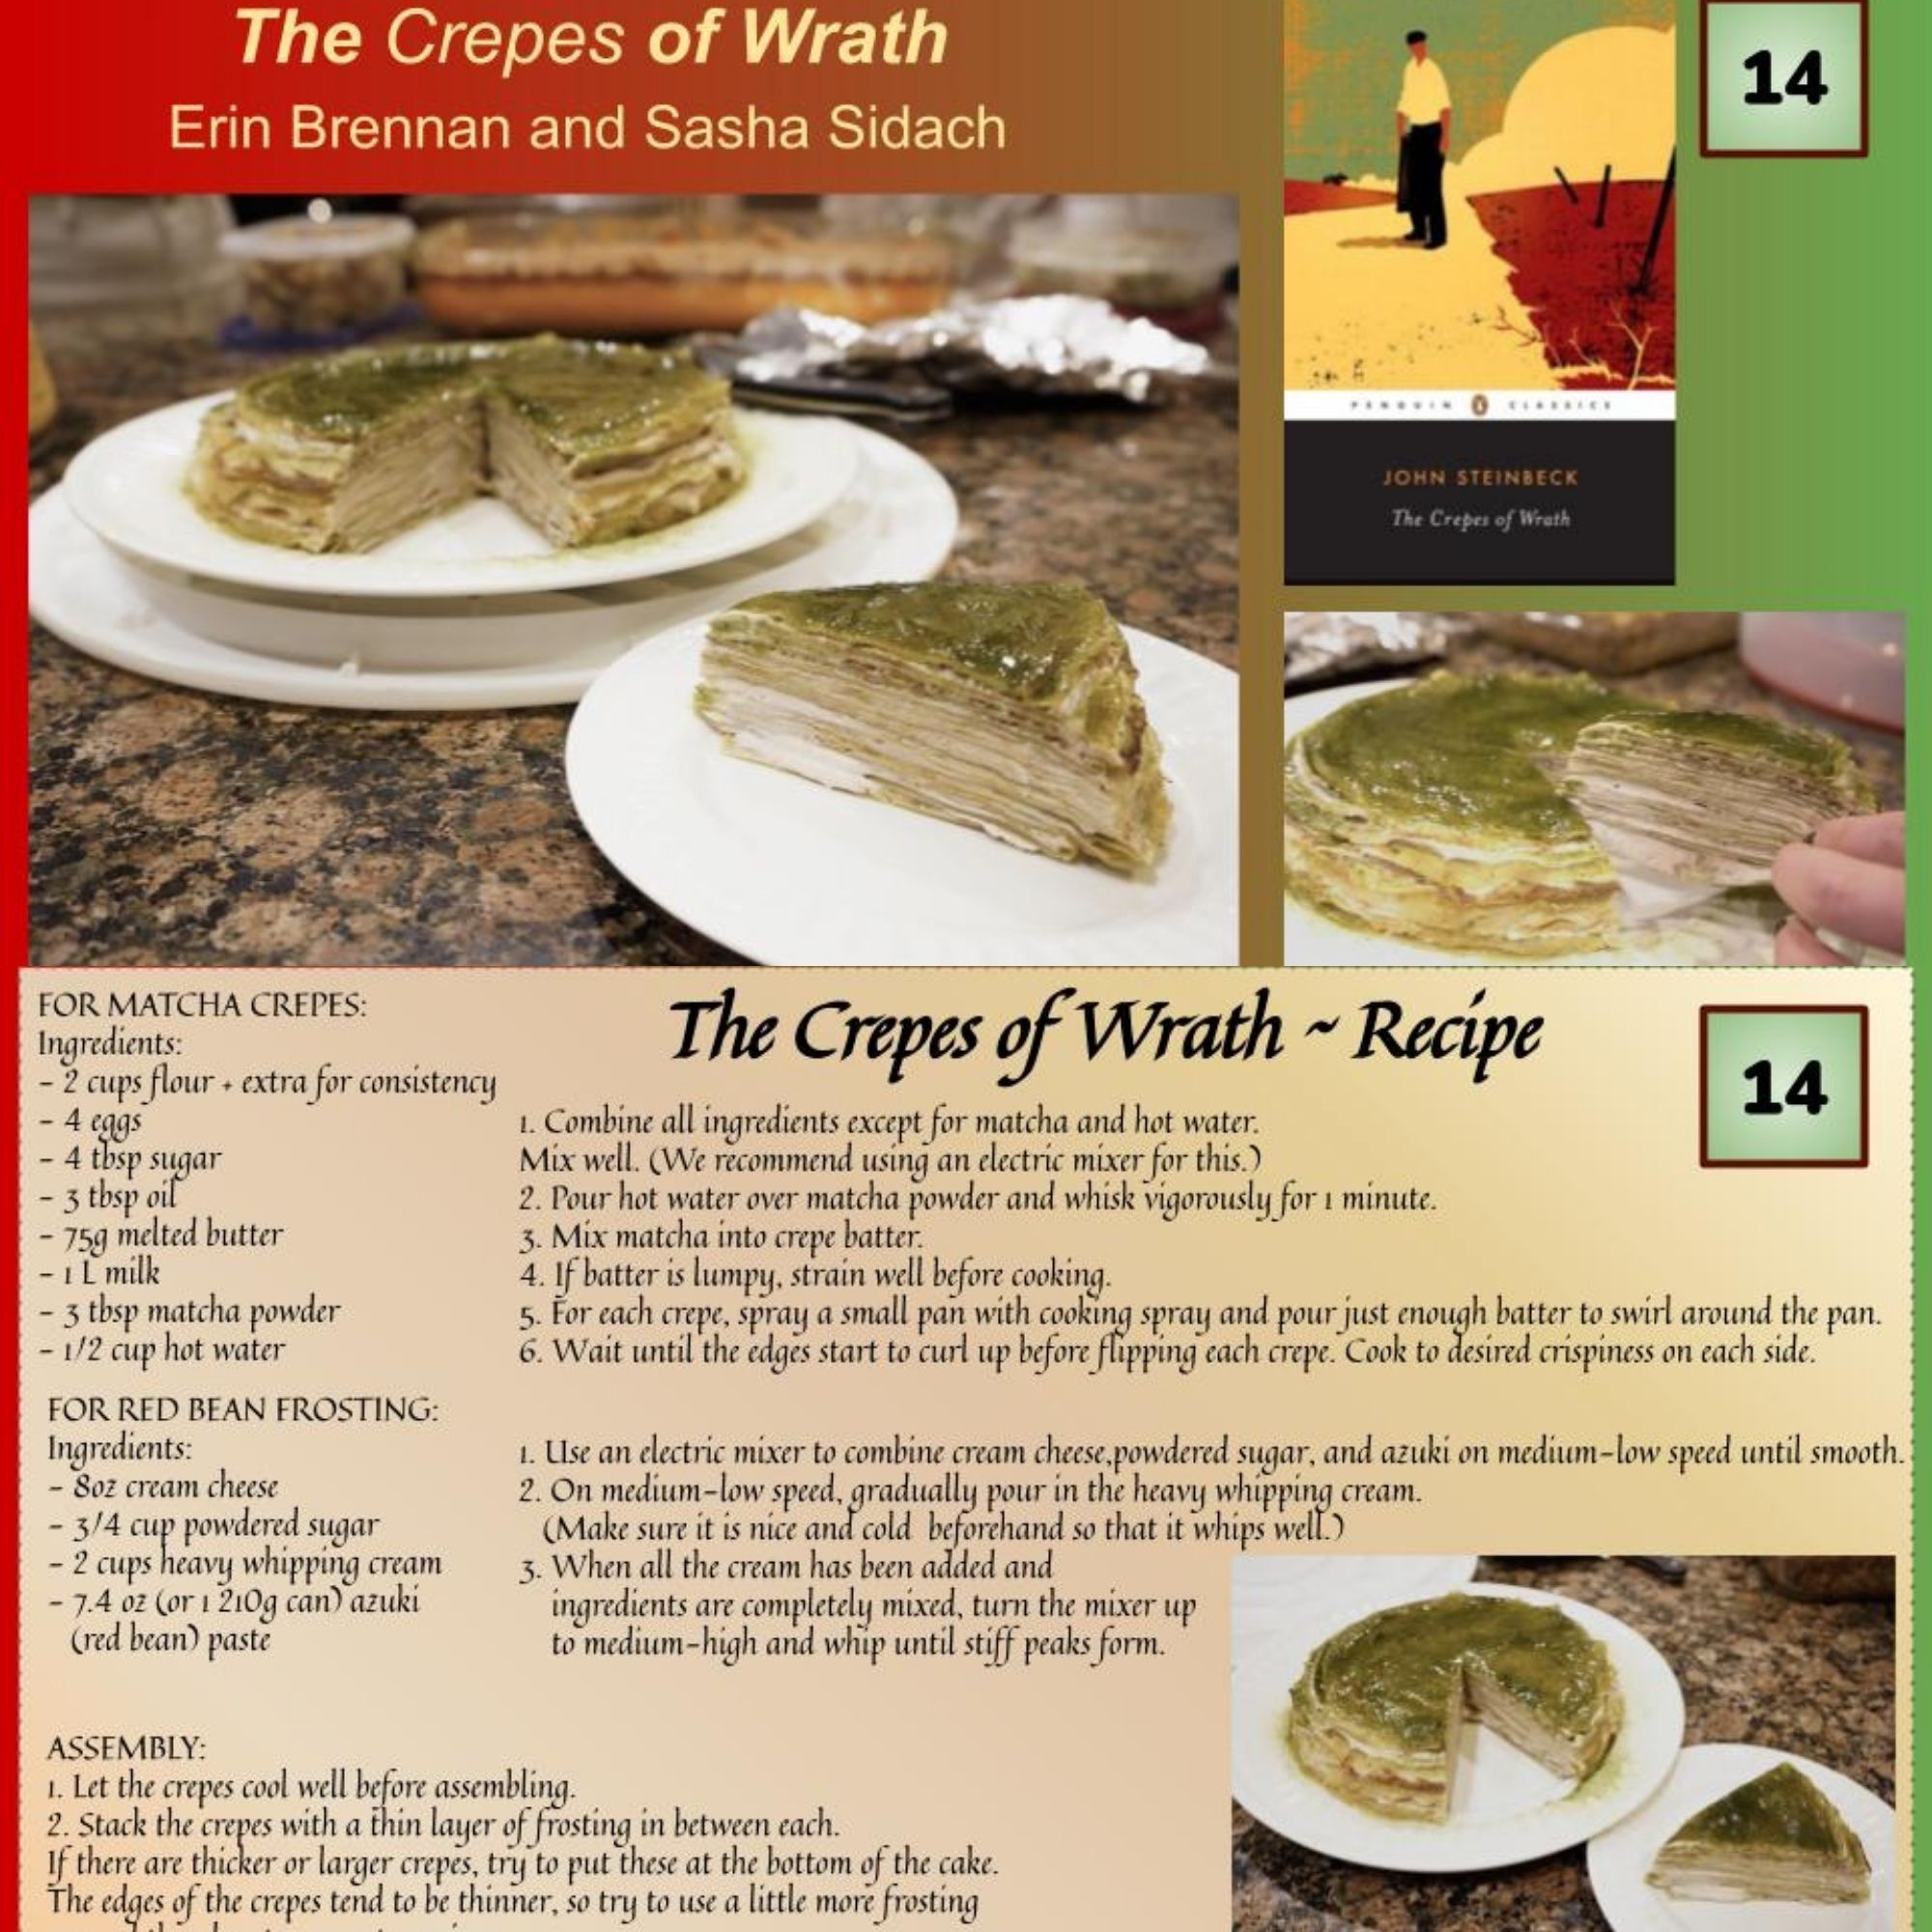 A photo of a stack of crepes with a green frosting on top along with a recipe.